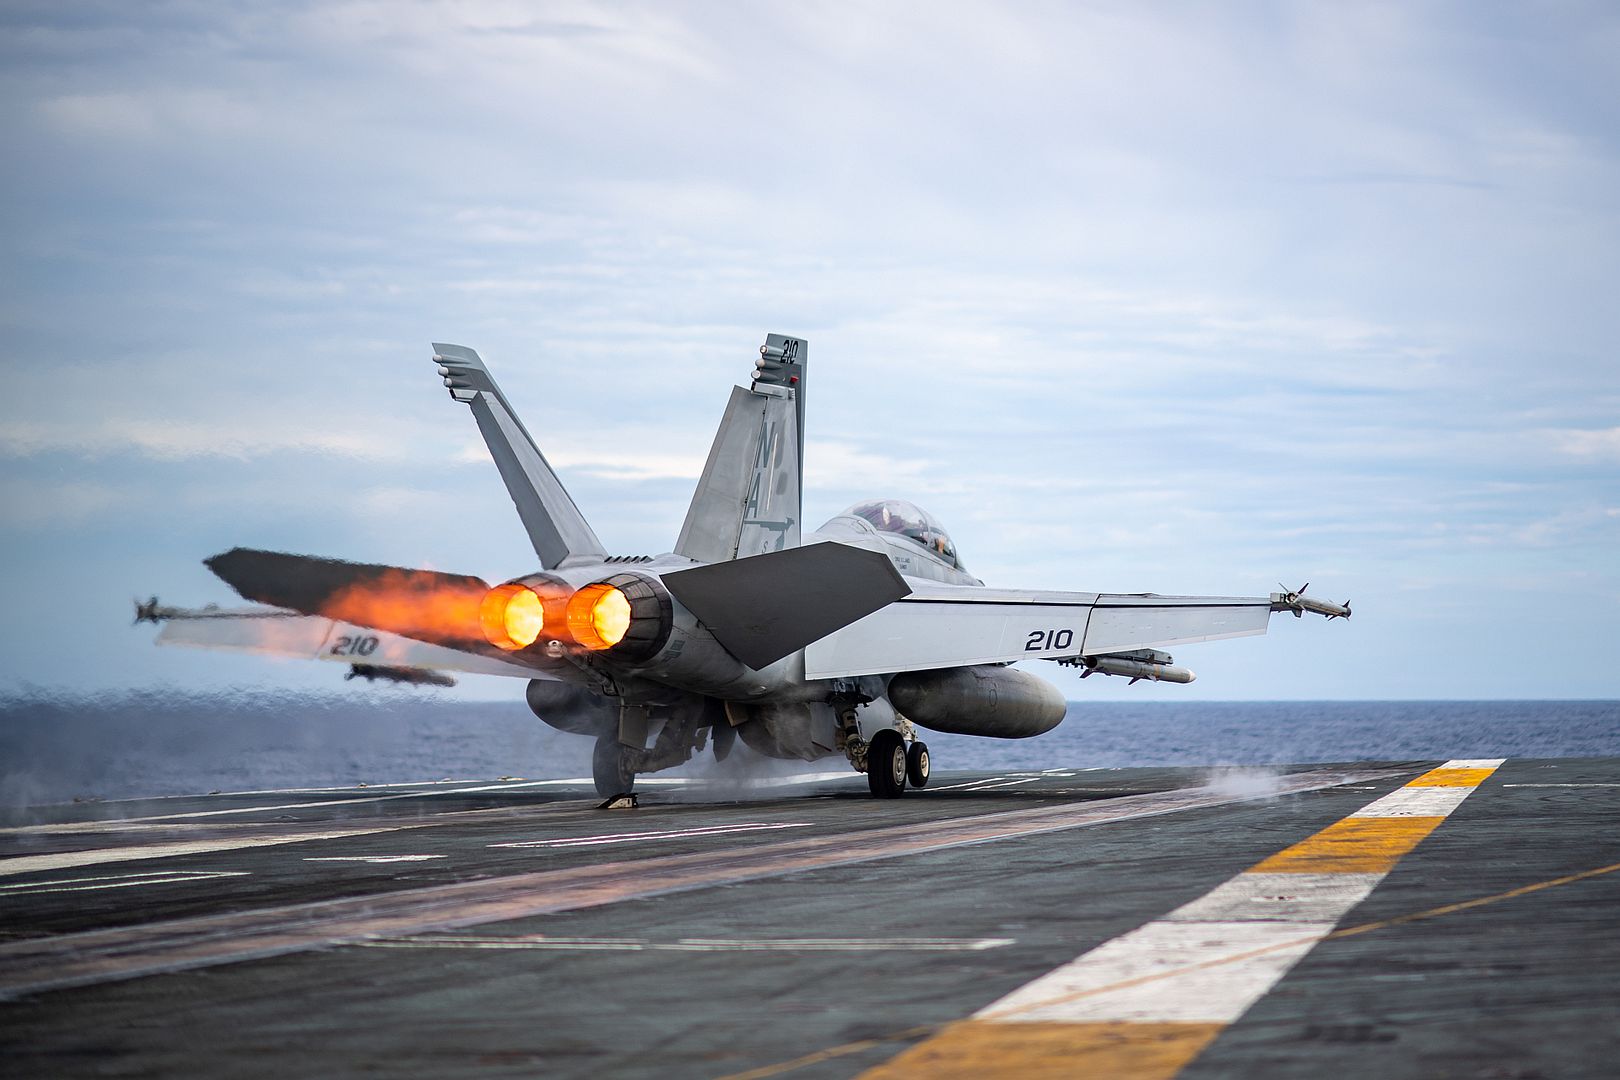 18F Super Hornet From The Mighty Shrikes Of Strike Fighter Squadron 94 Launches From The Flight Deck Of The Aircraft Carrier USS Nimitz